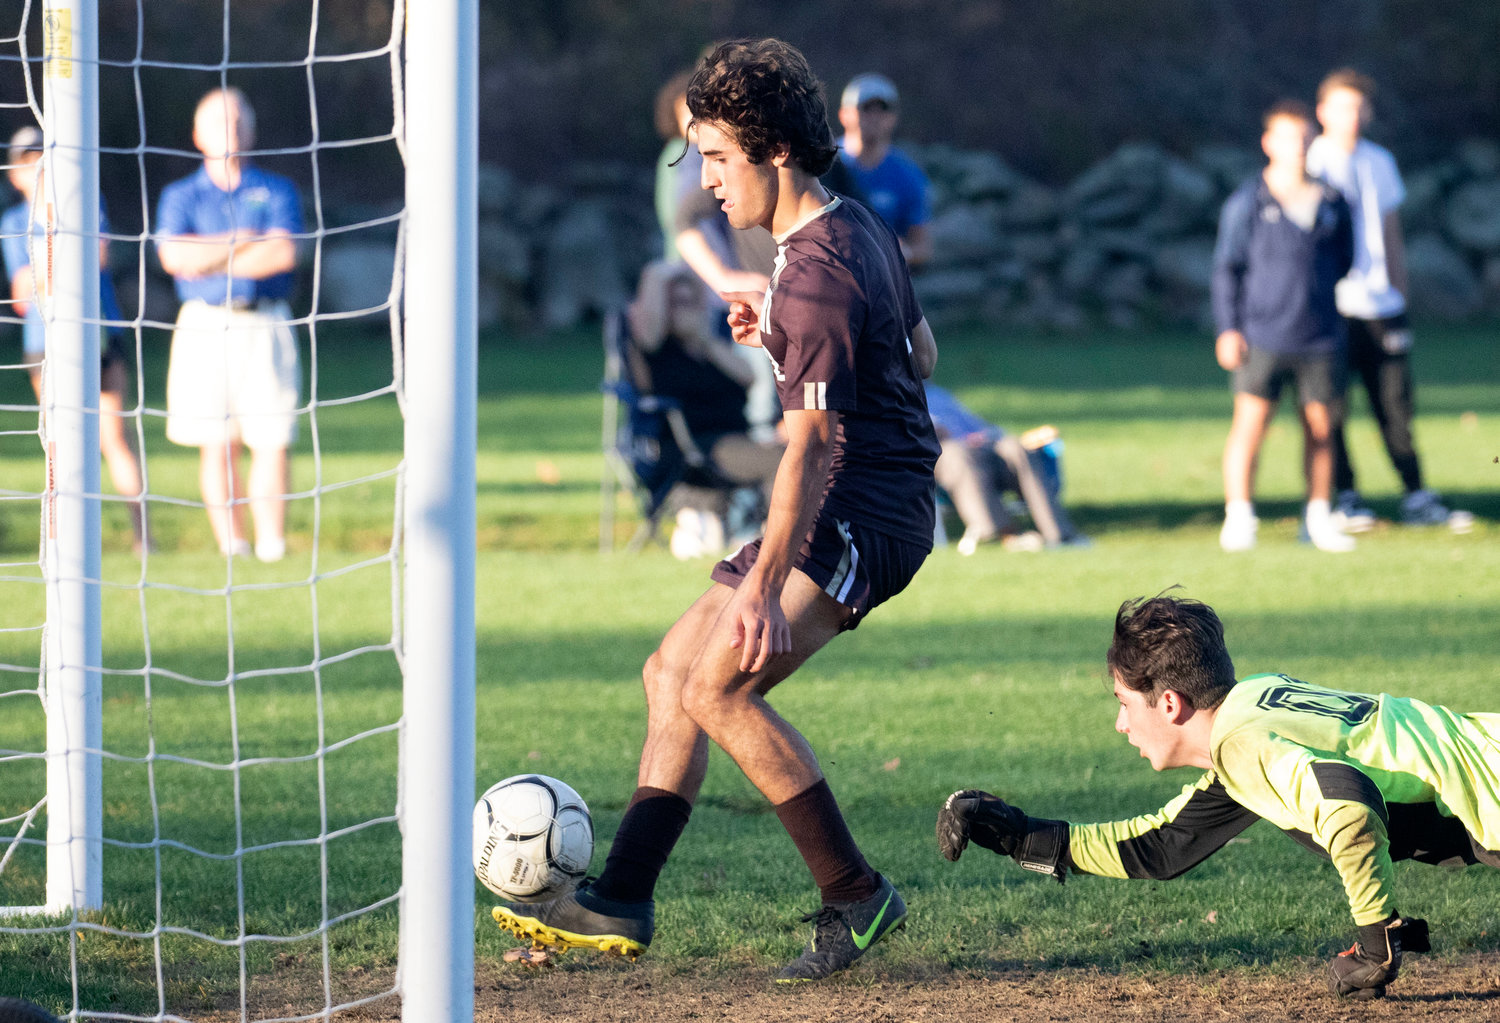 Striker Hunter Brodeur taps the ball into the net to give Westport a 3-0 lead in the Wildcats win over Granby in the Division 5 round of 32. Brodeur blasted a shot on the keeper and collected his own rebound to score the goal. The senior now has 37 goals for the season.